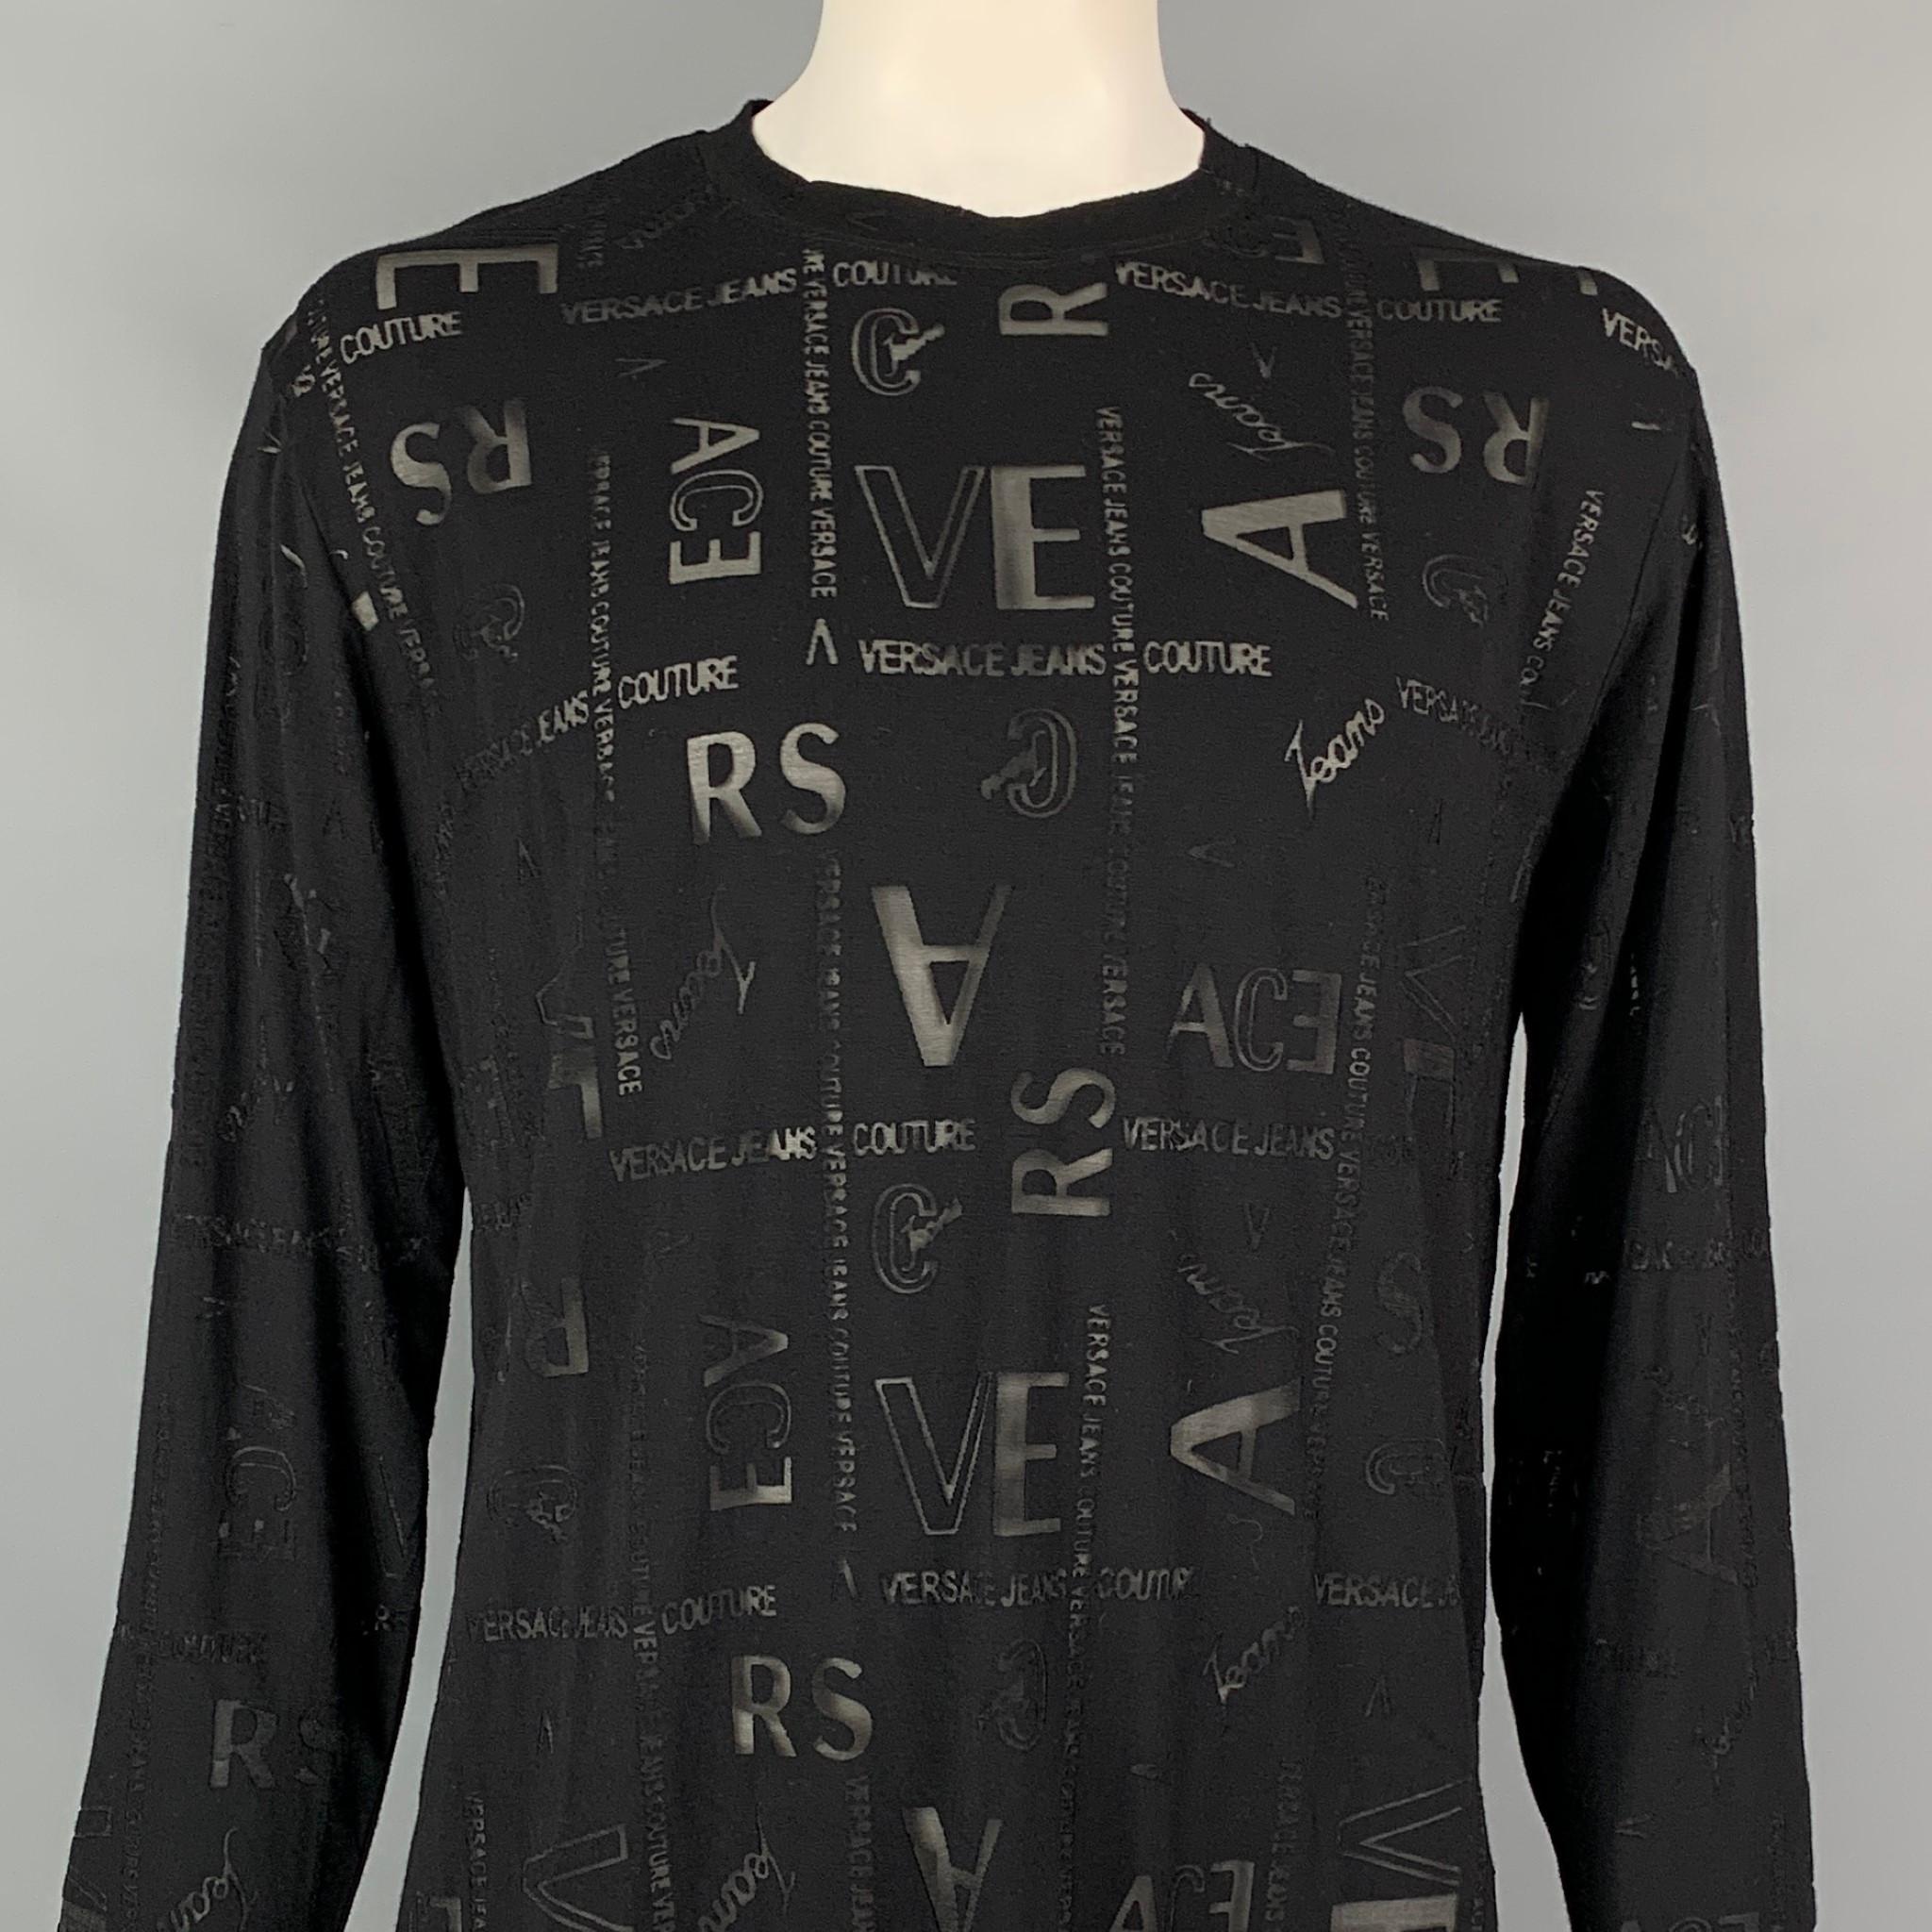 VERSACE JEANS COUTURE pullover comes in a black viscose blend with a all over see through logo design featuring a crew-neck. Made in Italy.

Very Good Pre-Owned Condition.
Marked: XXXL

Measurements:

Shoulder: 21 in.
Chest: 46 in.
Sleeve: 26.5